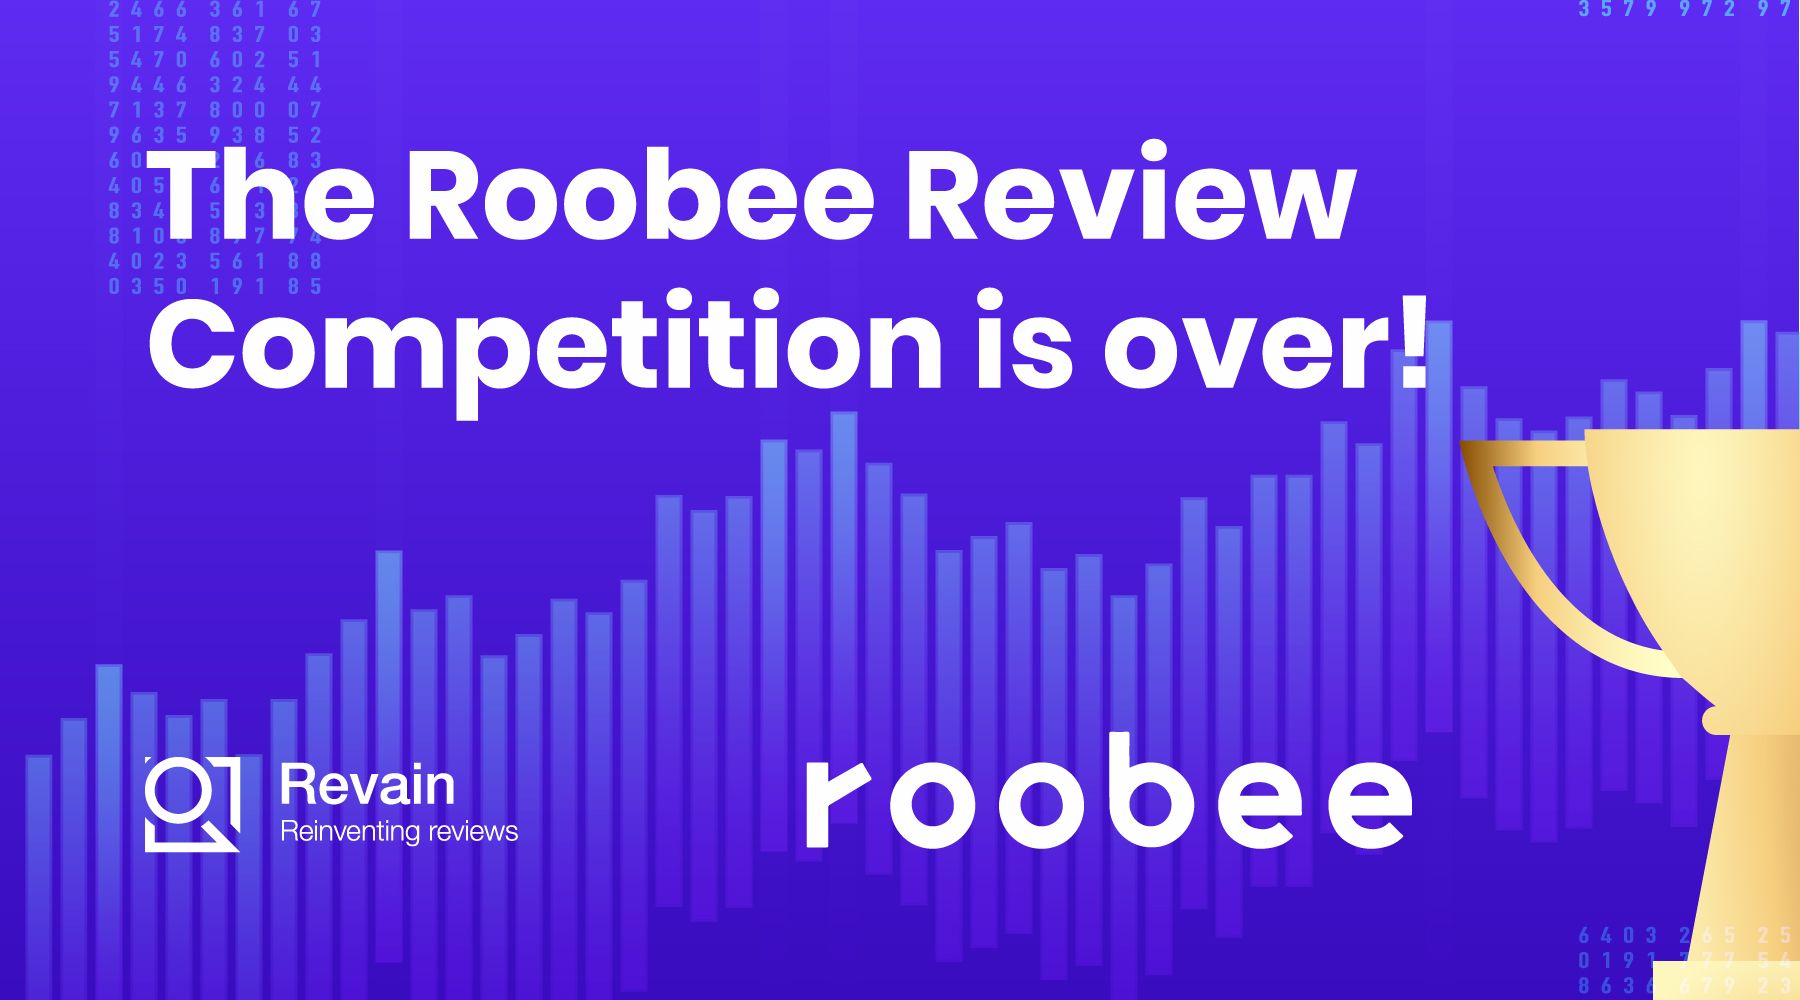 Article The Roobee Review Competition is over!